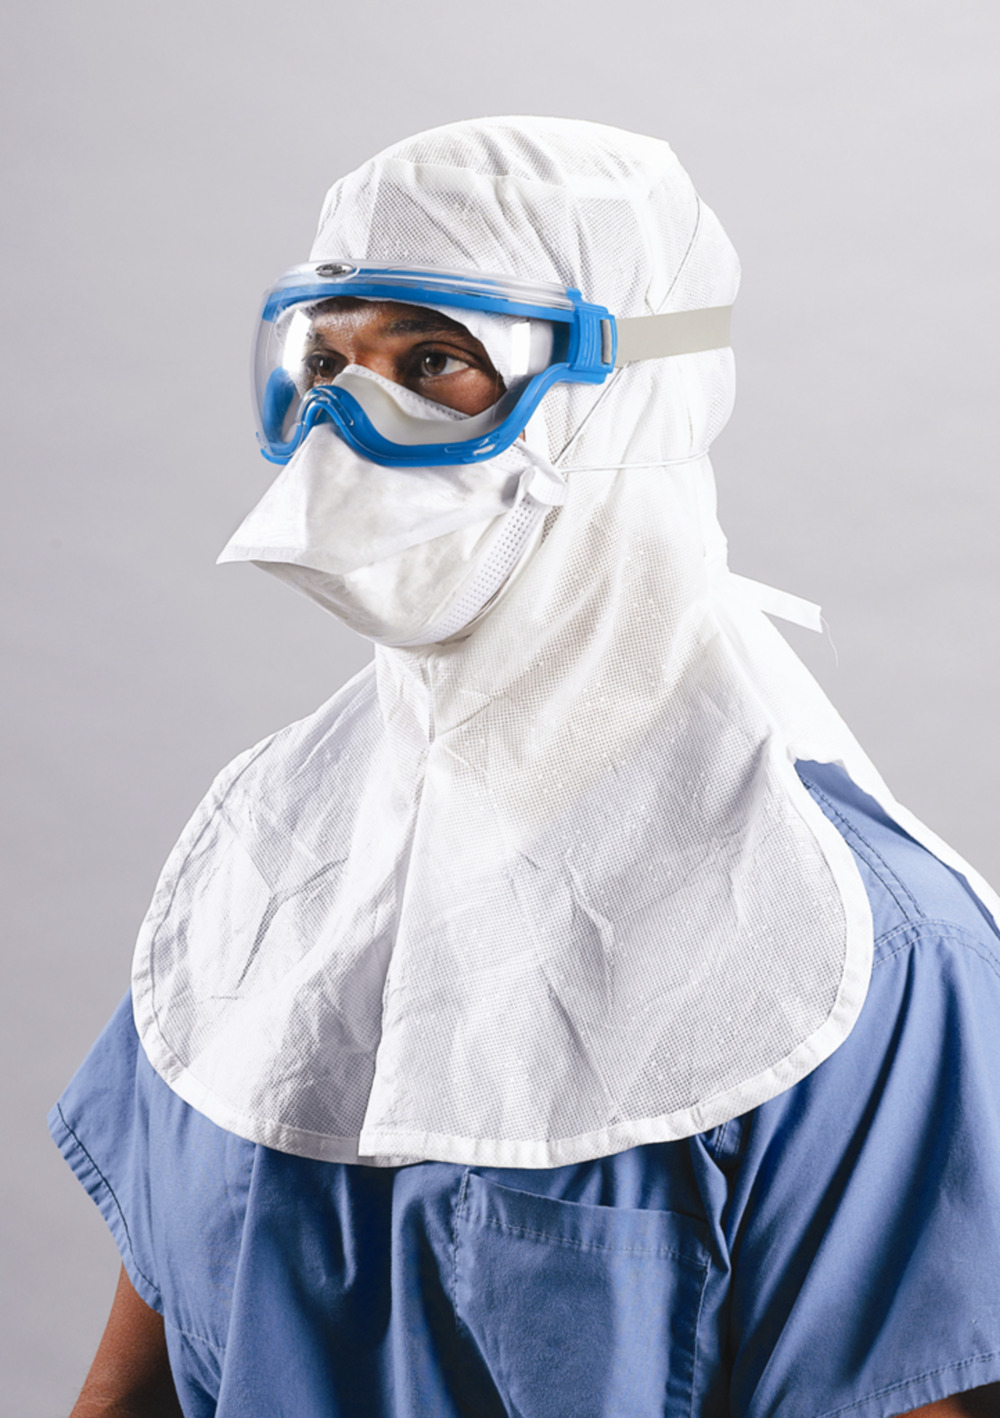 Kimtech™ M3 Certified Sterile Pouch style Face Mask 62483 - Universal, 200 sterile face masks. - 62483